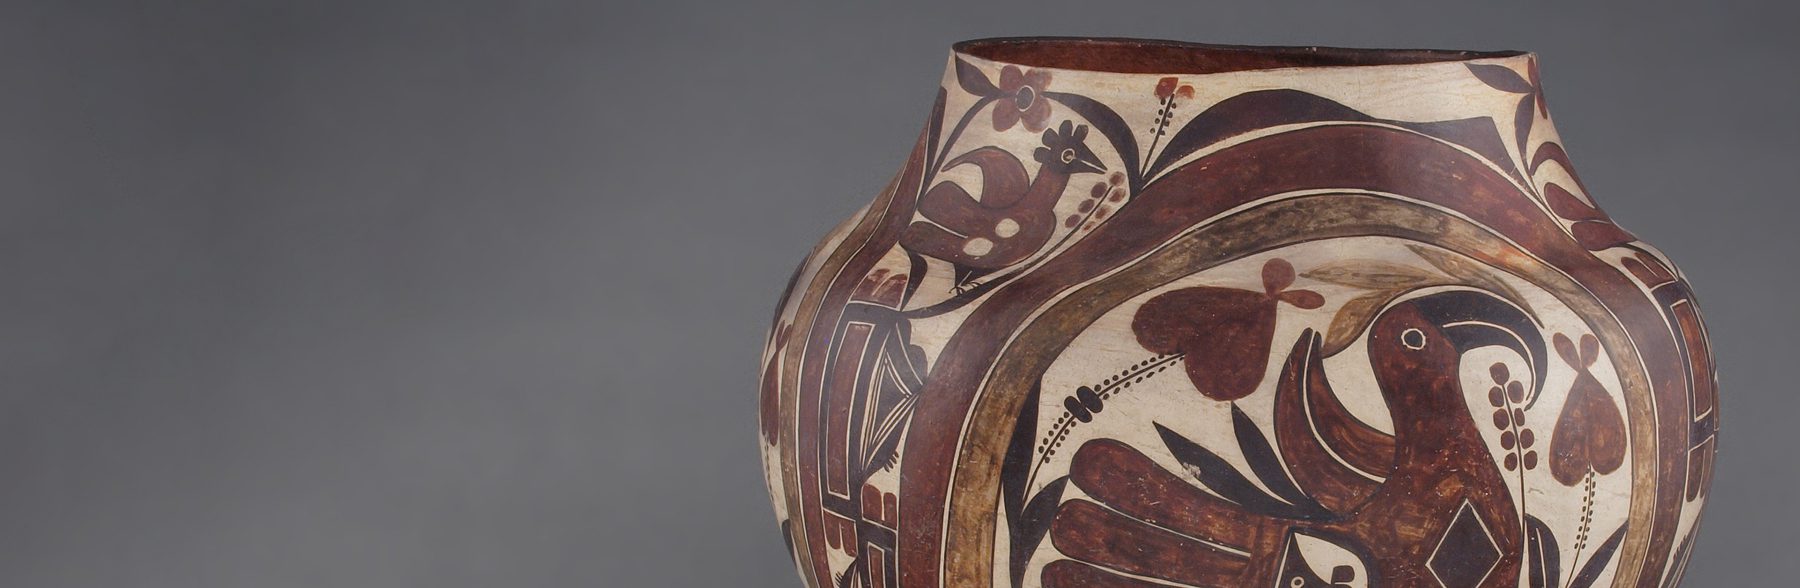 Shelburne Museum’s Major Summer Exhibition “Built from the Earth: Pueblo Pottery from the Anthony and Teressa Perry Collection” opens on June 24